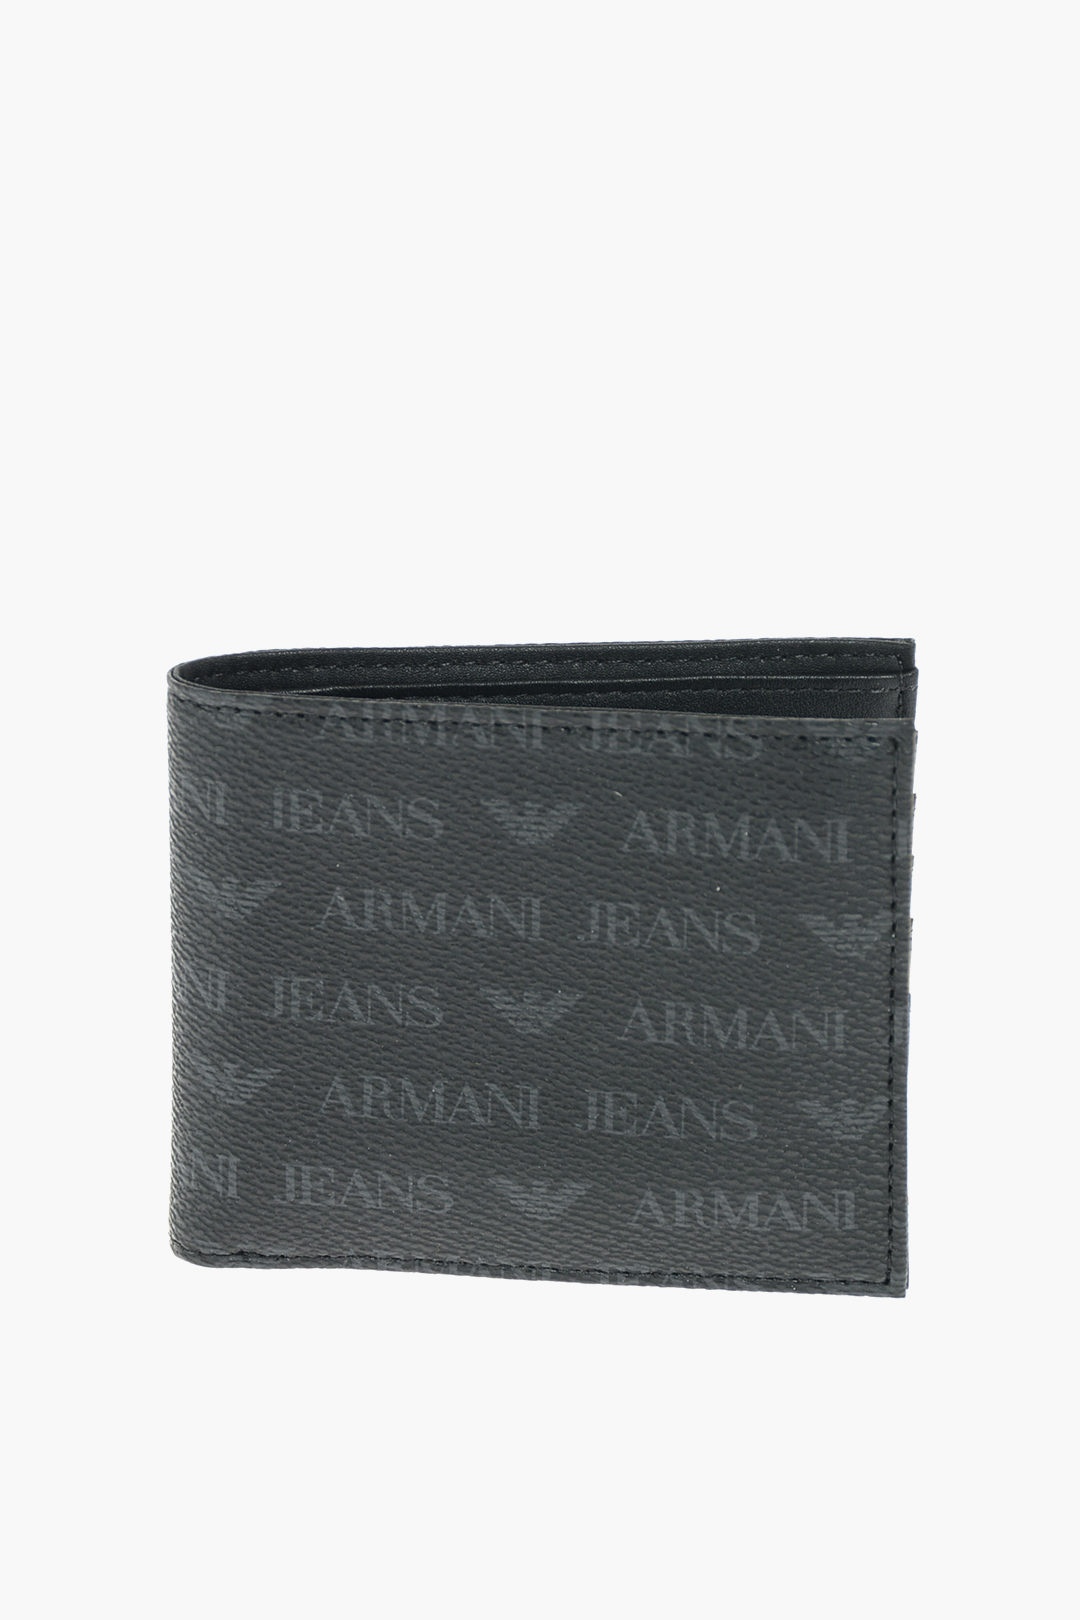 Emporio Armani Tumbled Leather Wallet With Coin Purse Black | ONU